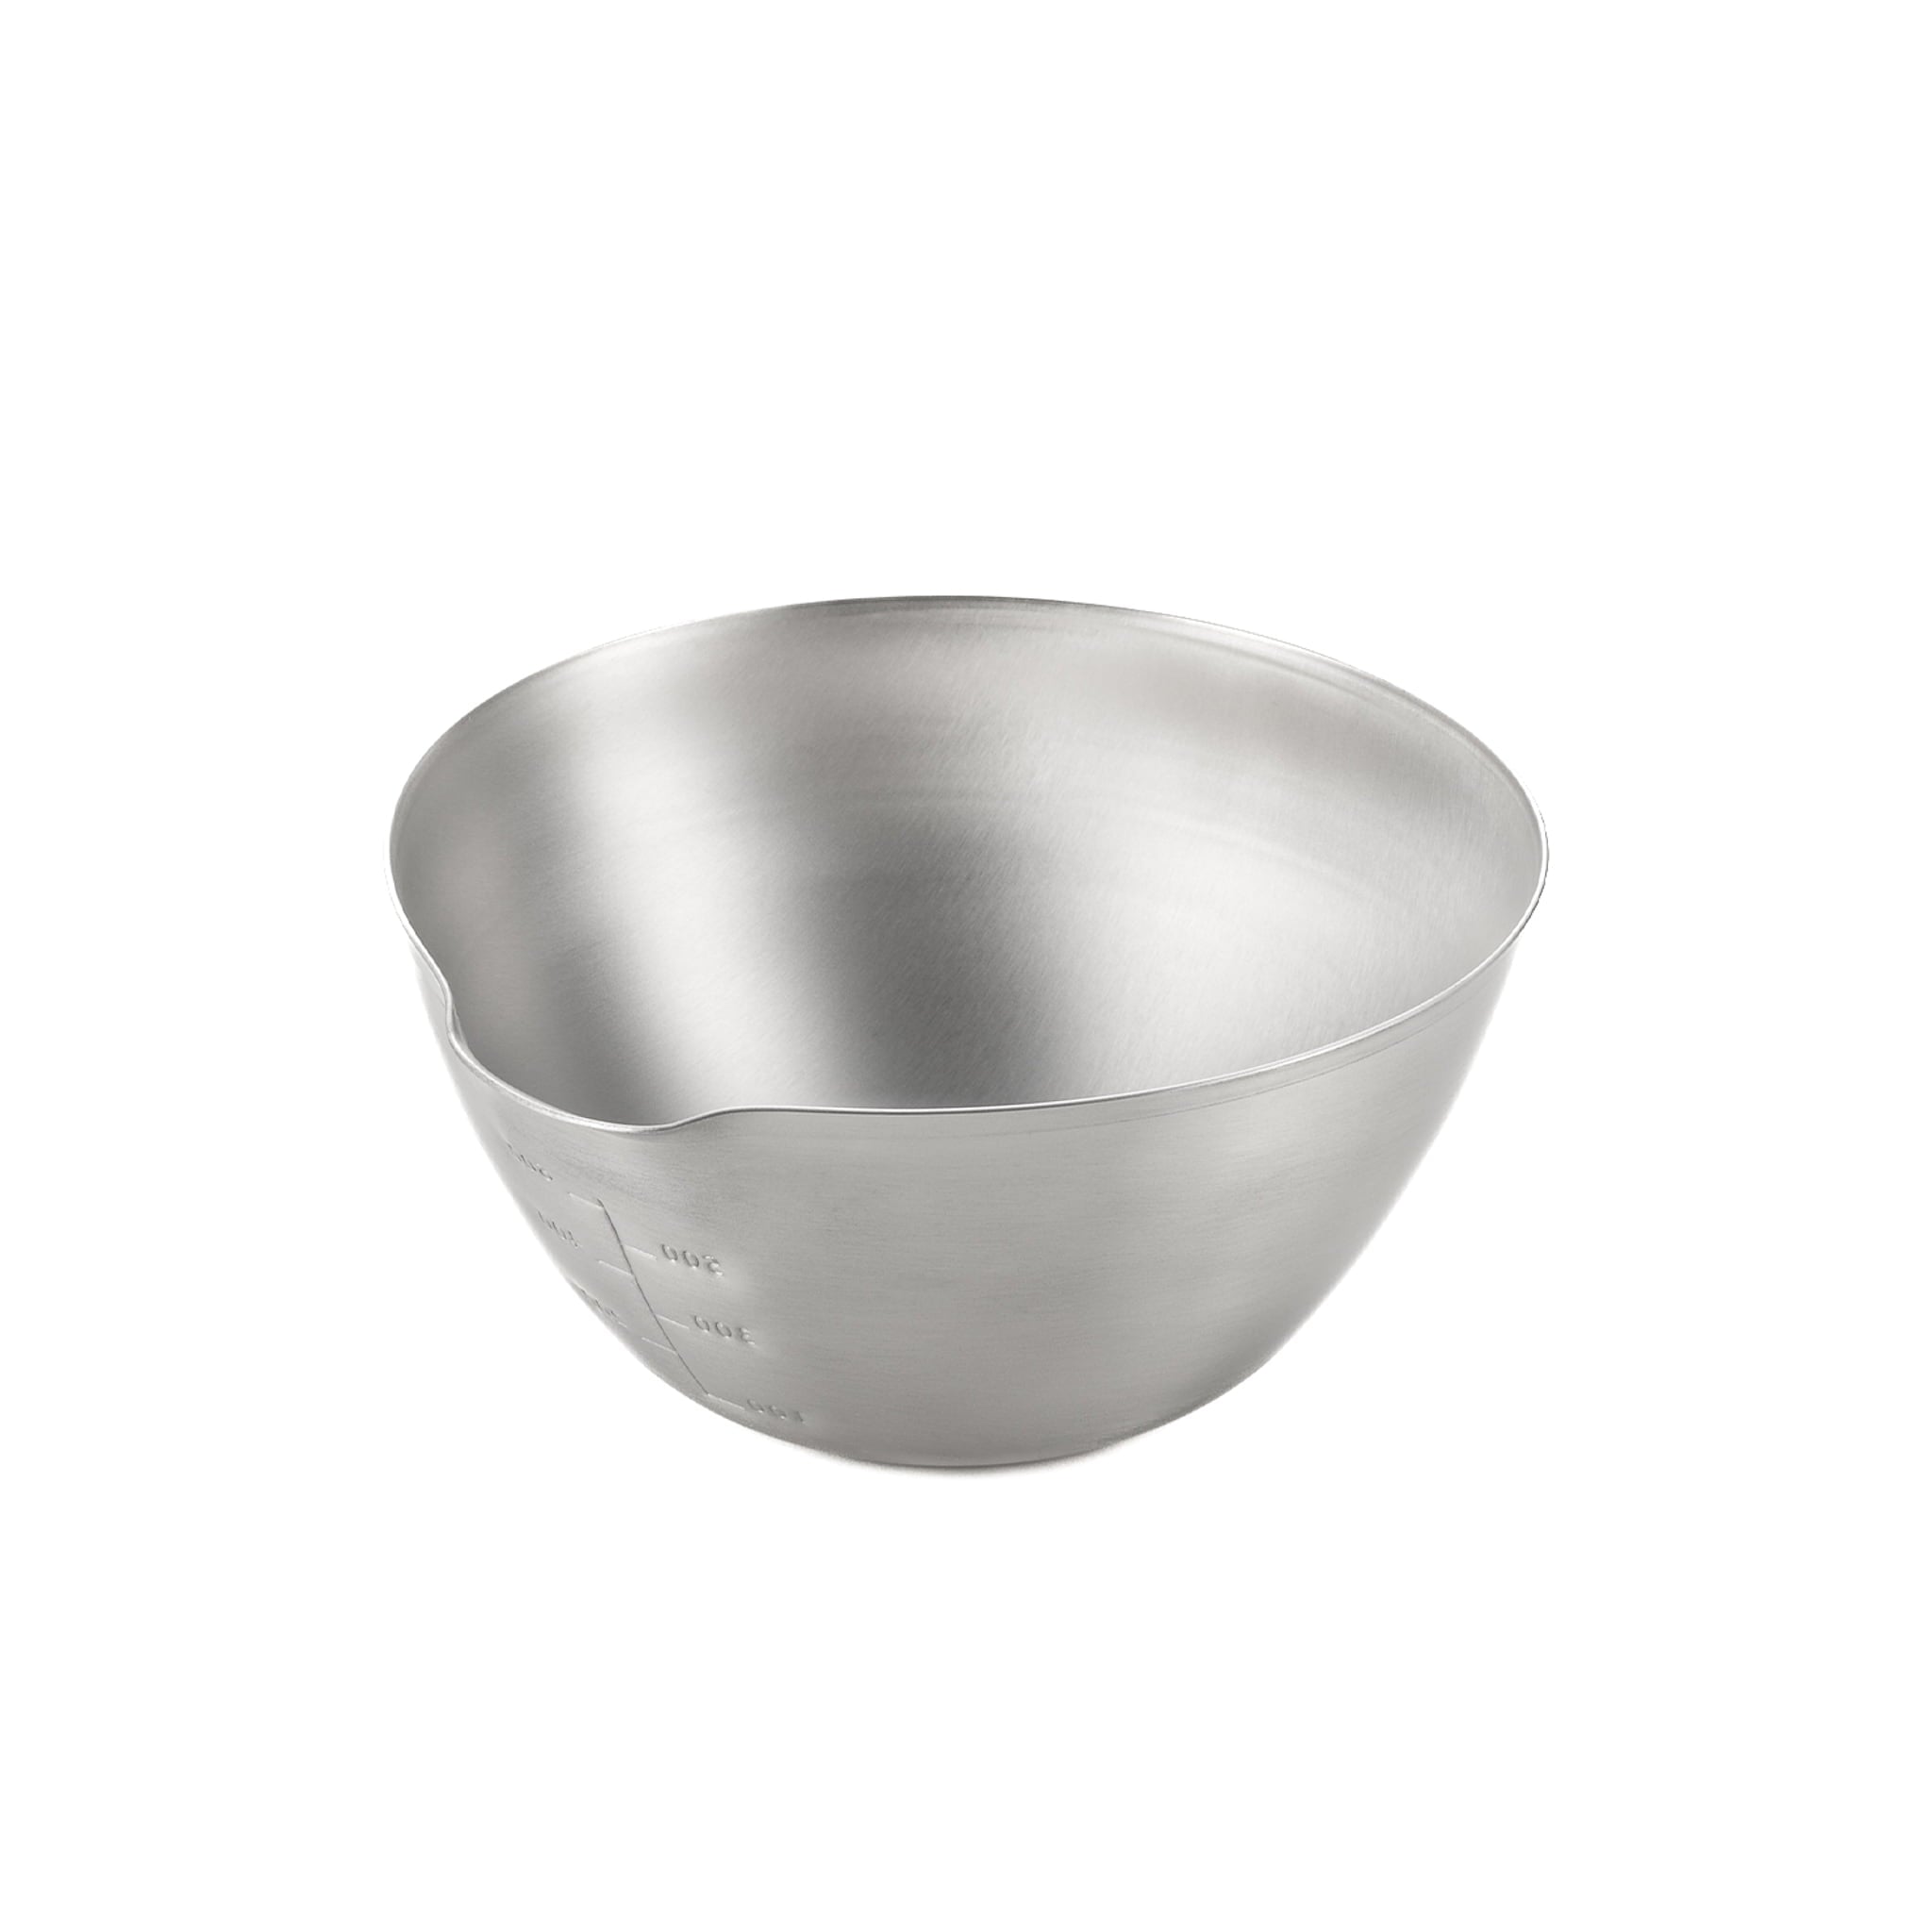 Japanese Stainless Steel Mixing Bowl with Pouring Spout